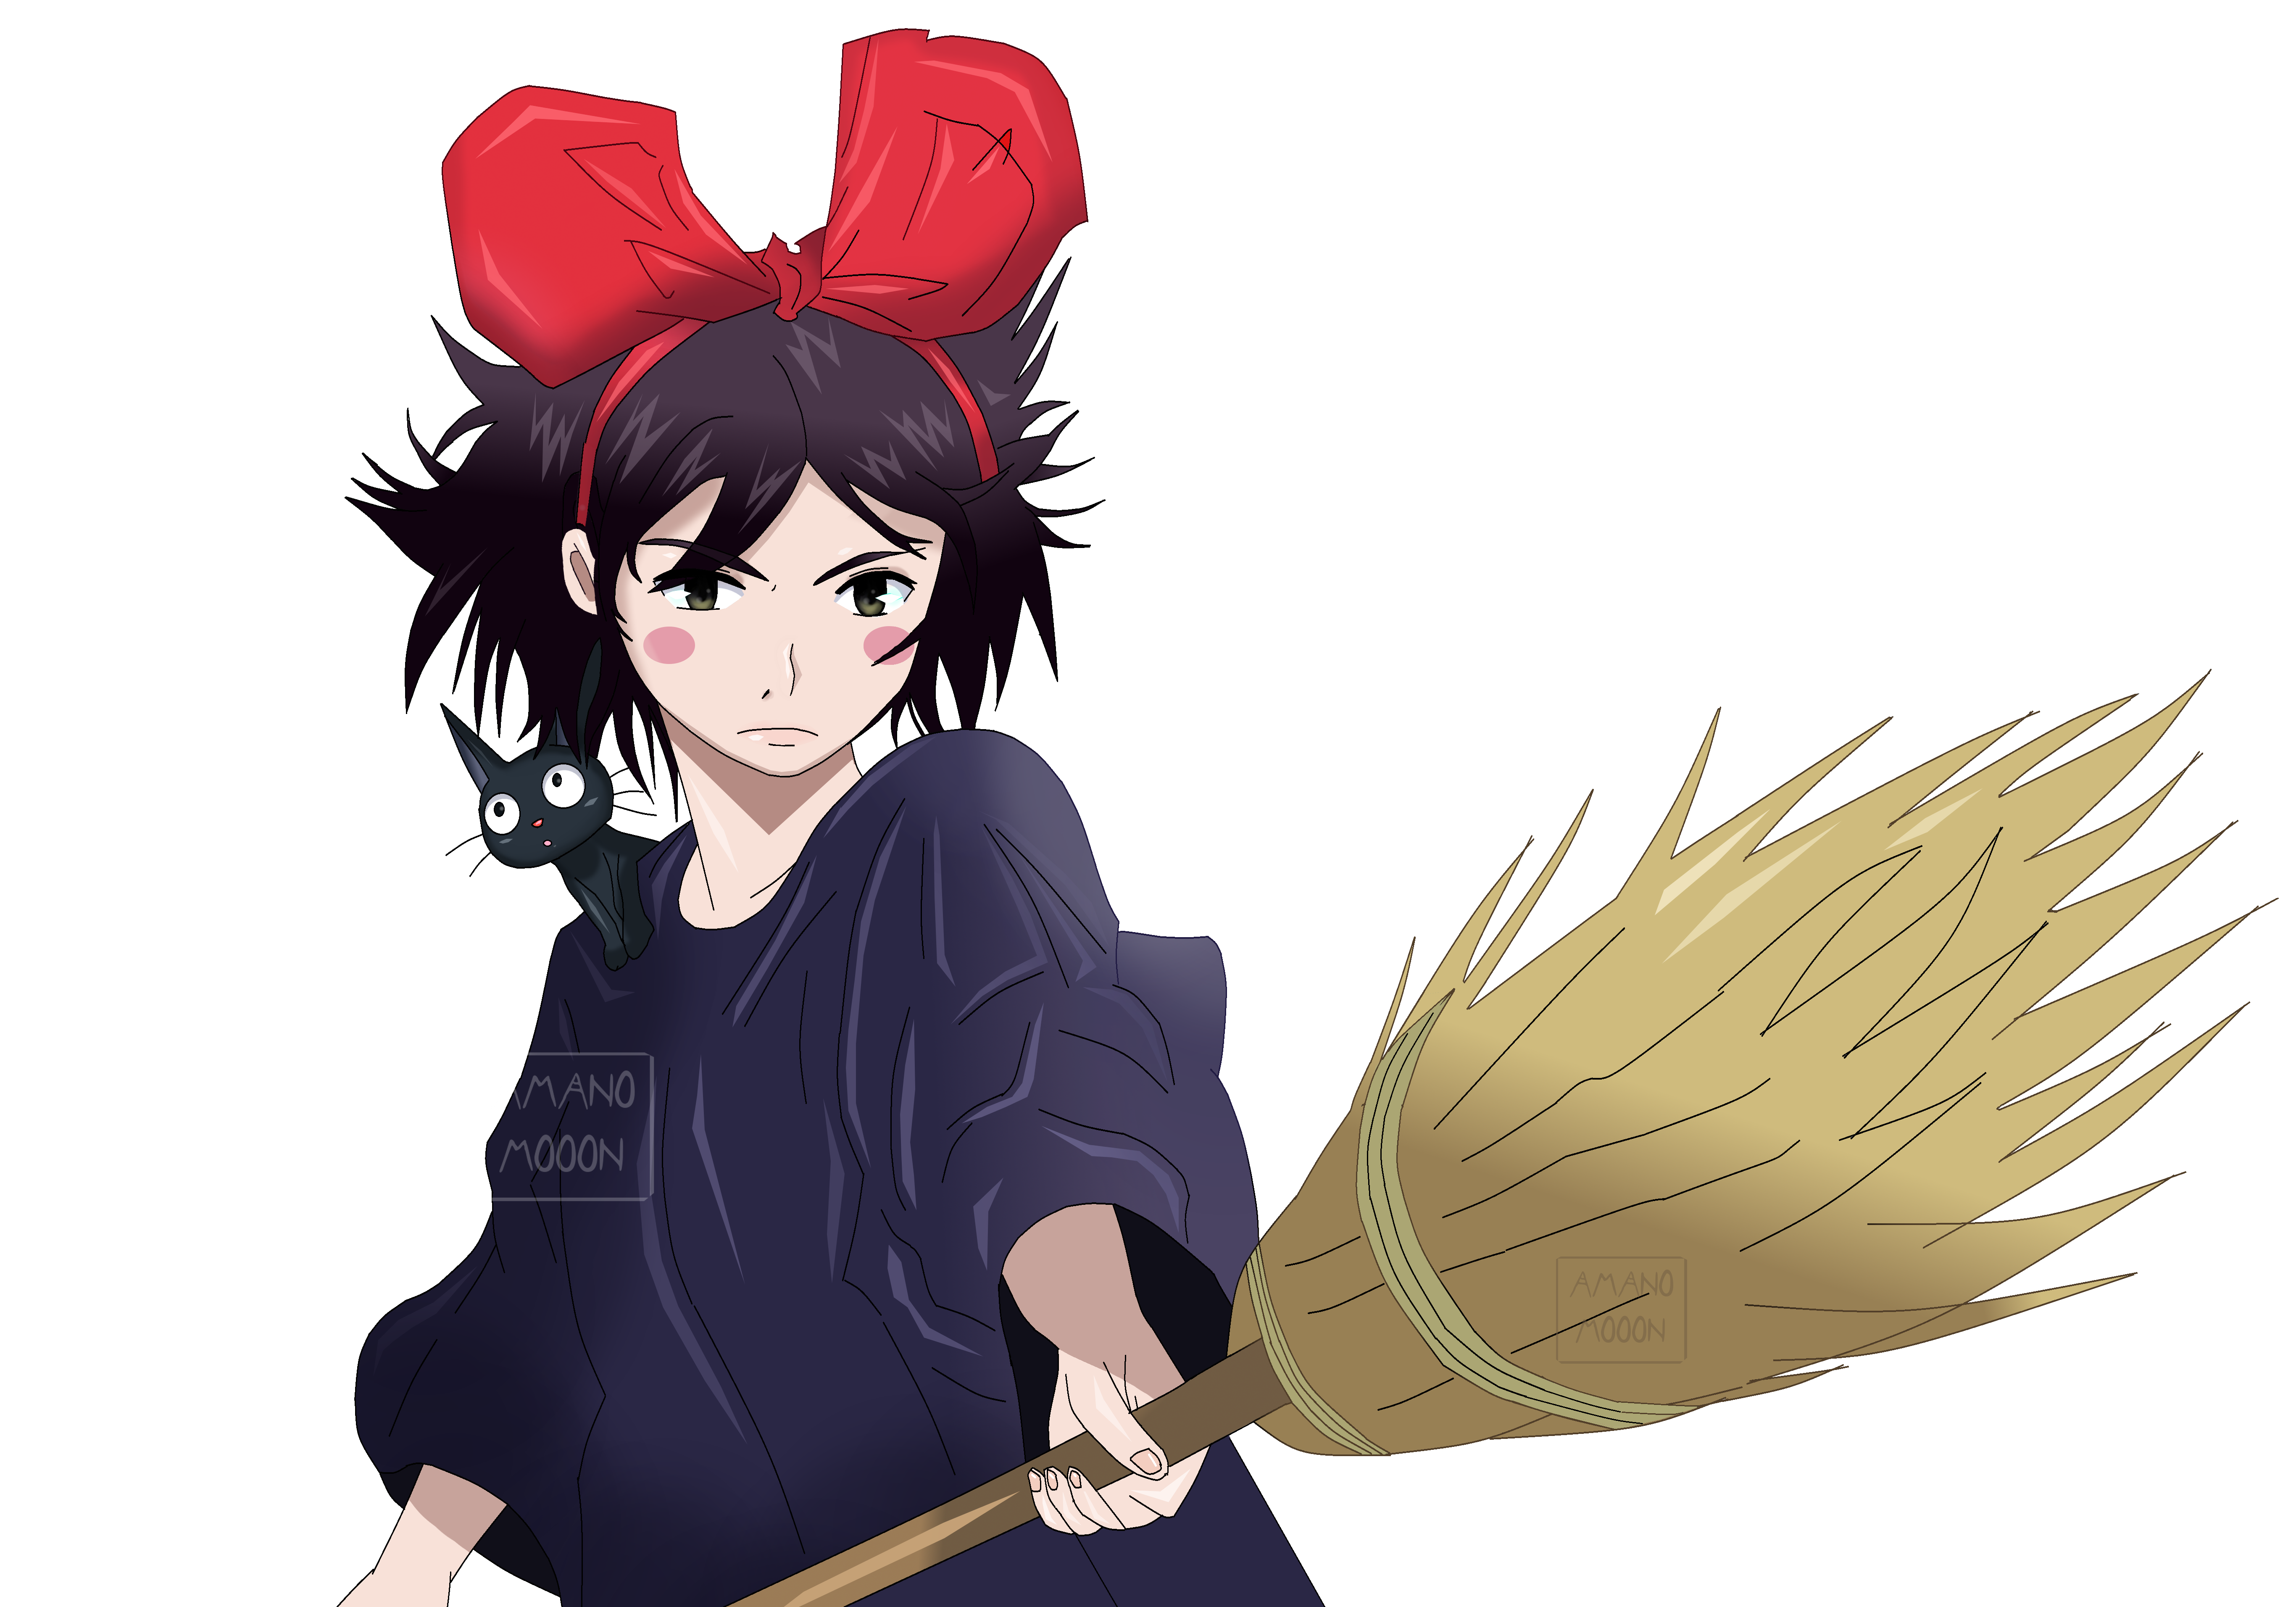 Anime Kiki's Delivery Service 4k Ultra HD Wallpaper by Amanomoon